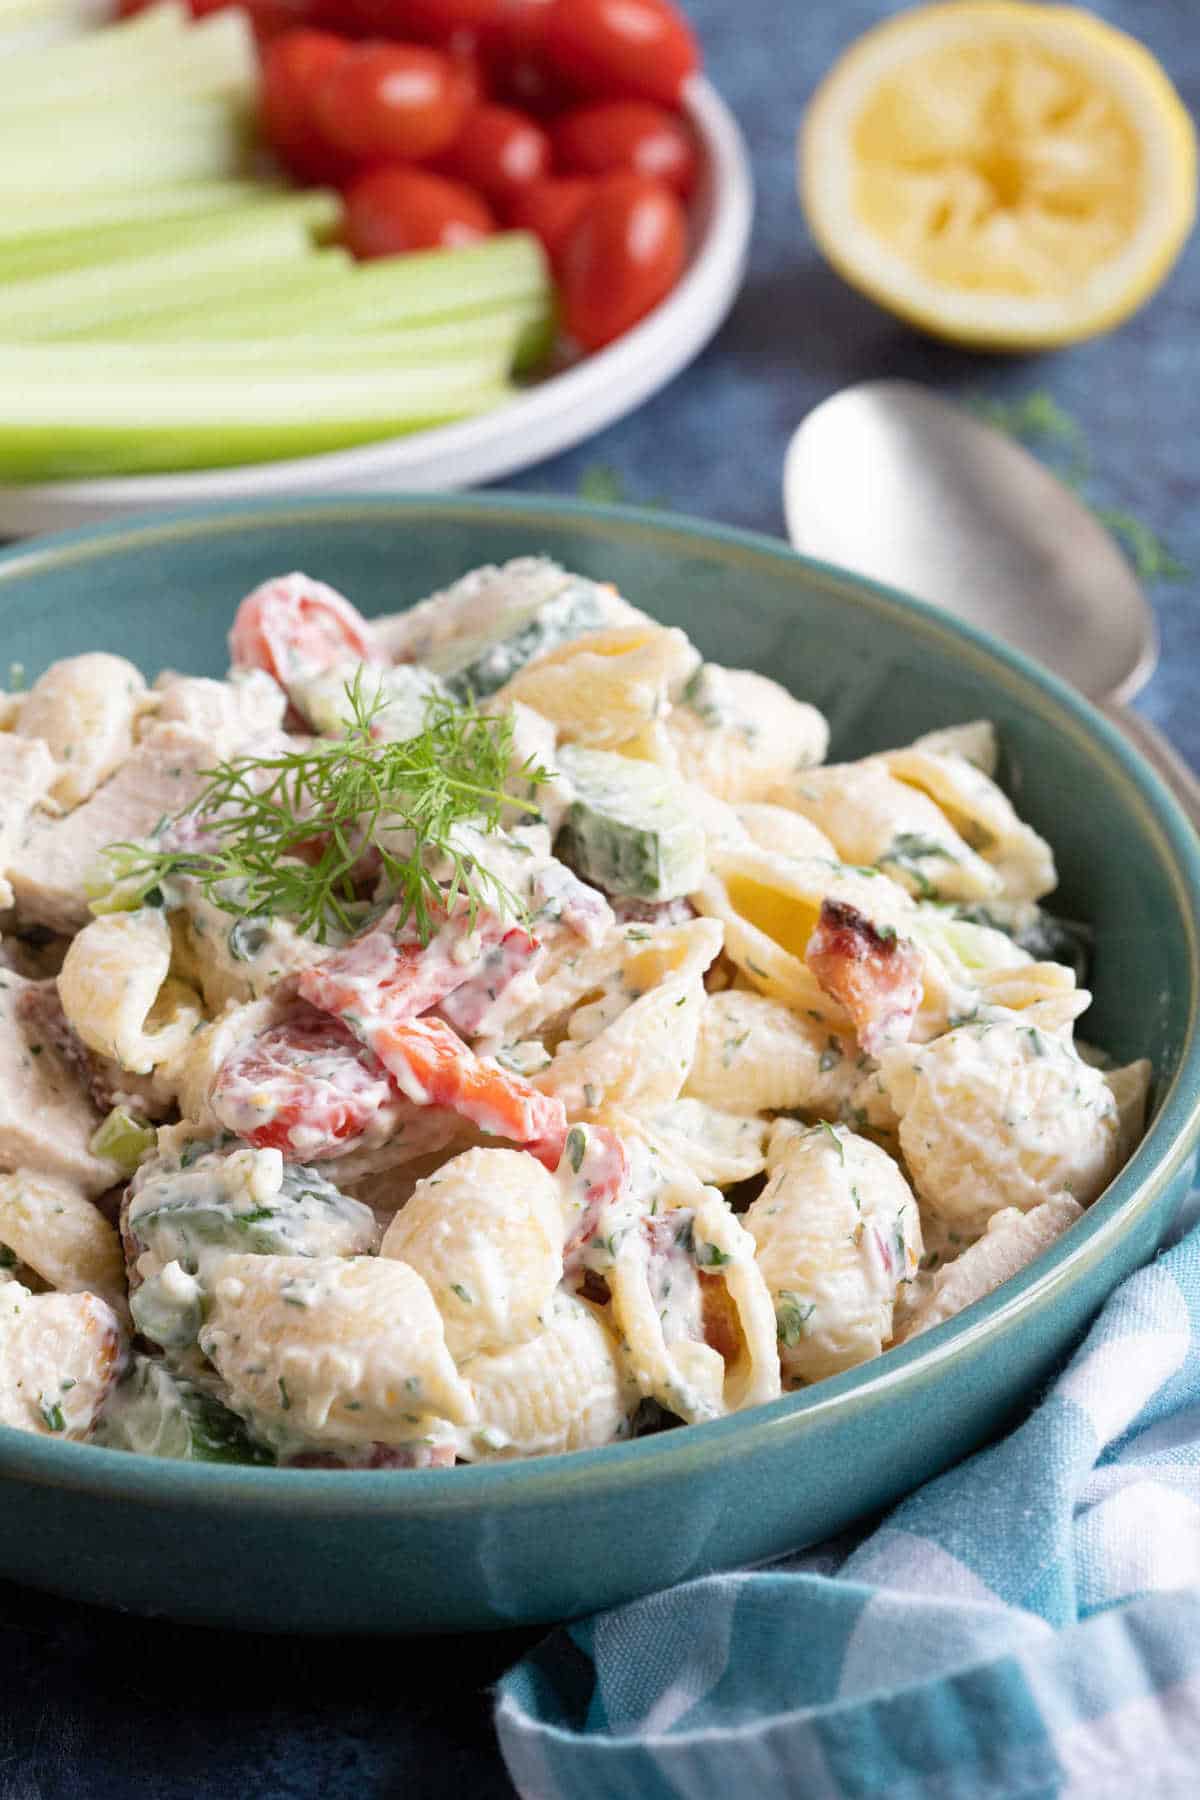 Chicken and bacon pasta salad in a serving bowl.